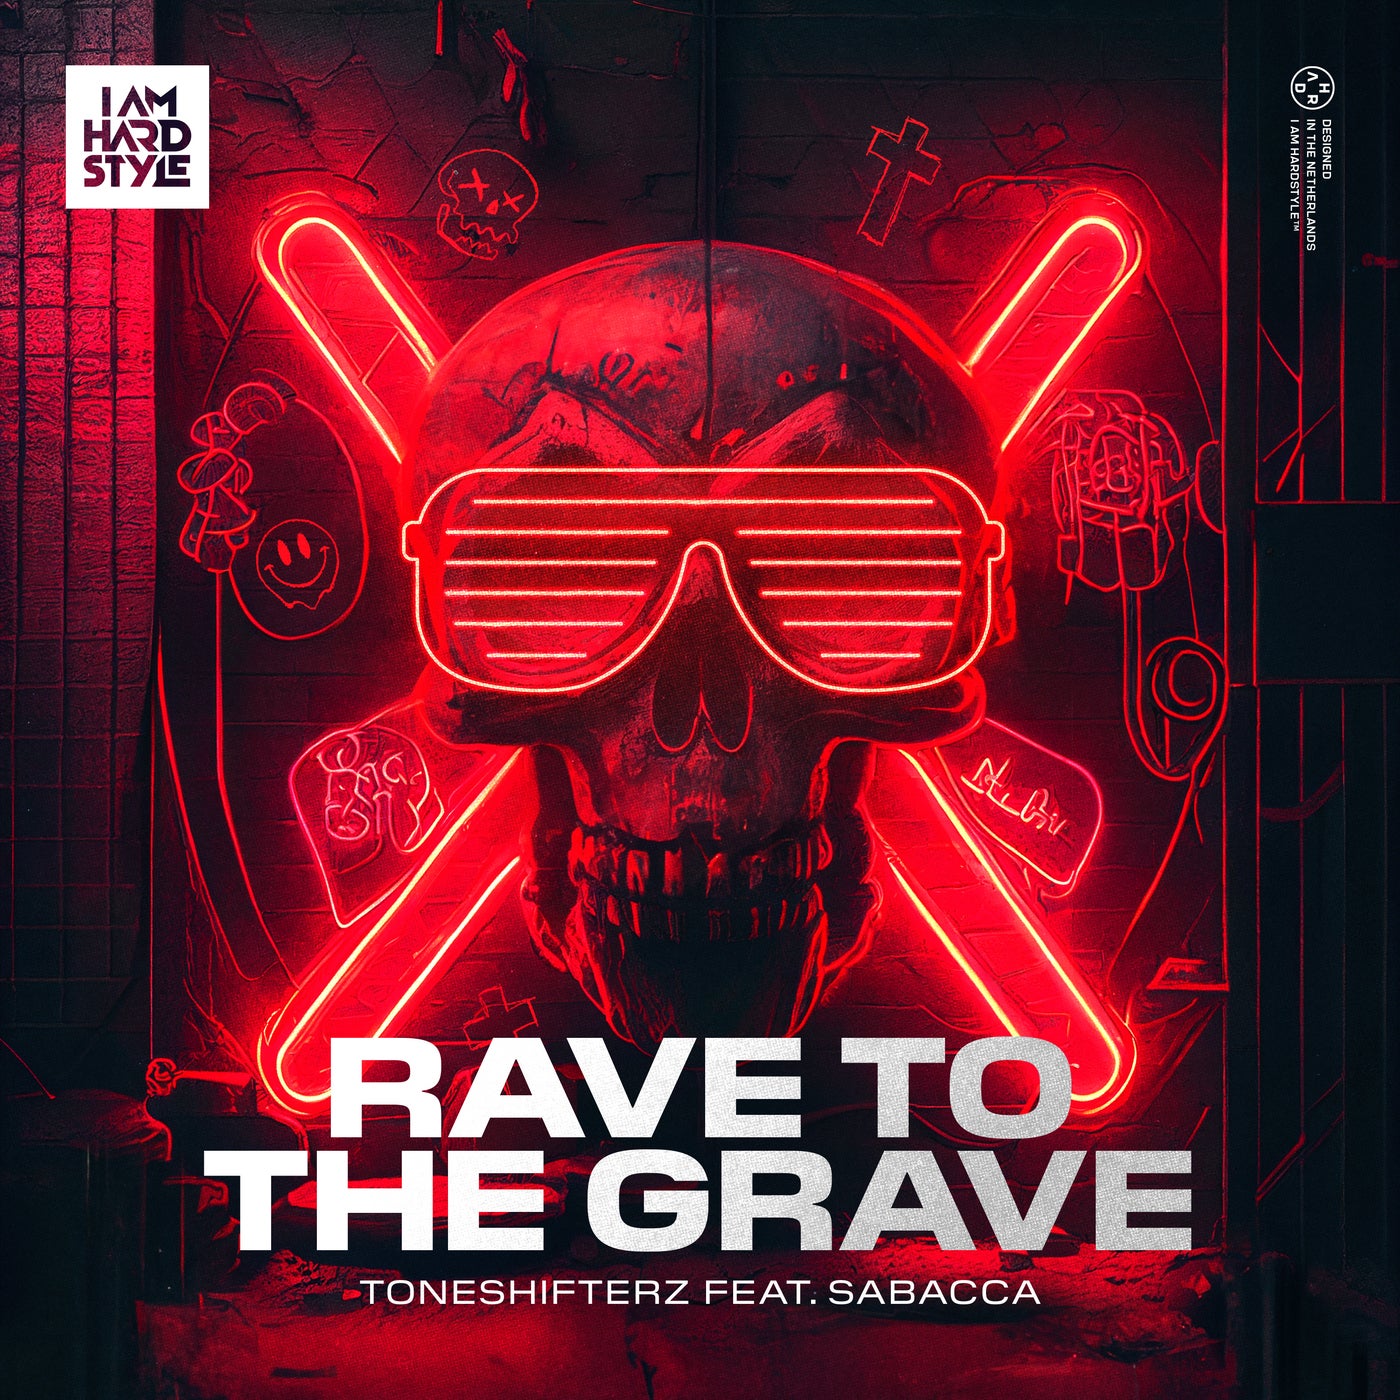 Toneshifterz Rave To The Grave (feat. Sabacca) [I AM HARDSTYLE